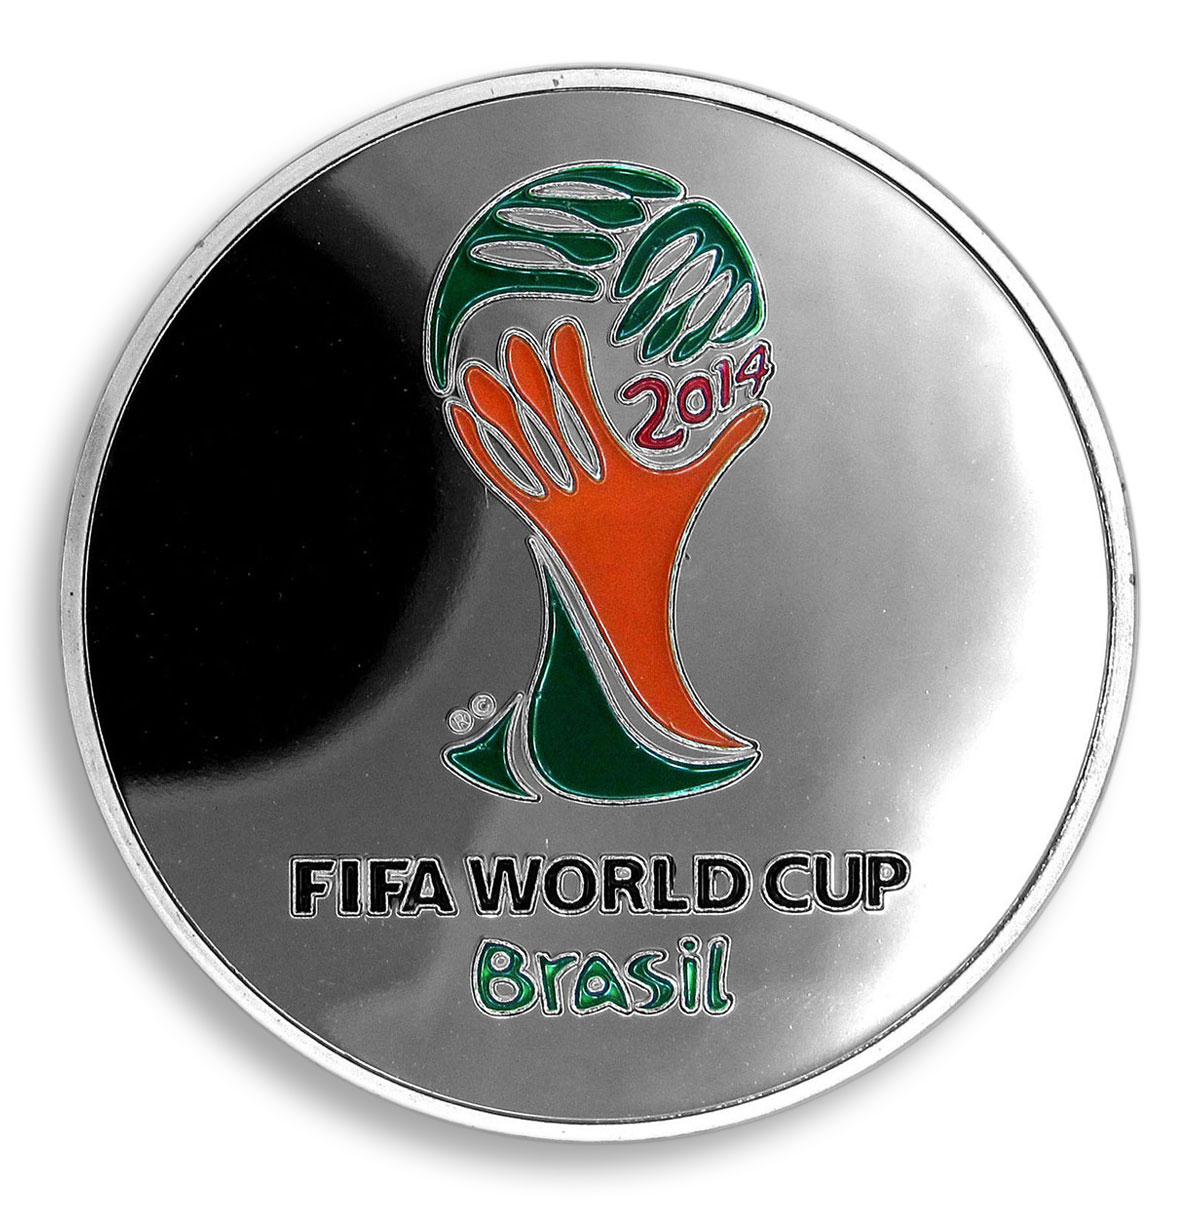 Lionel Messi, Football World Cup 2014, Argentina, FIFA, Silver Plated, Token